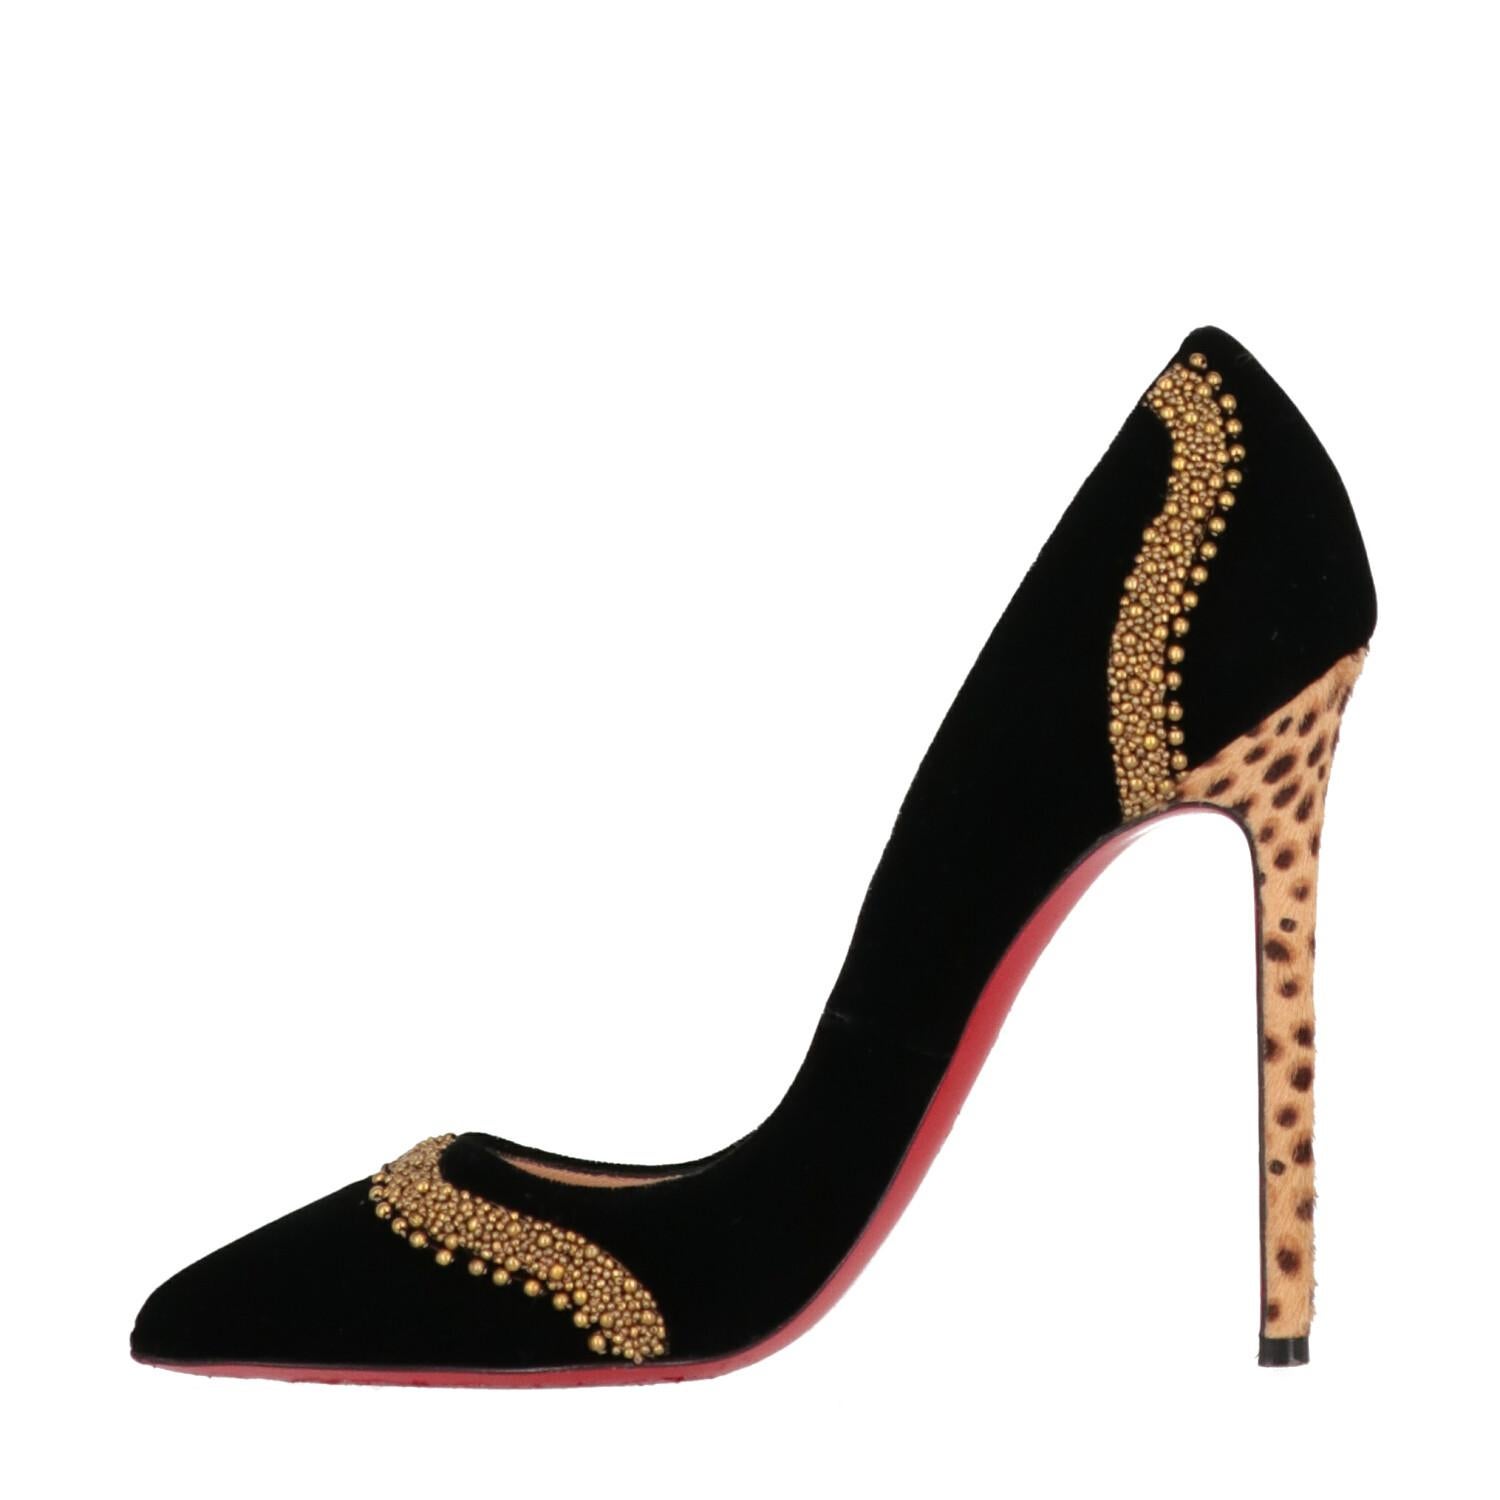 A.N.G.E.L.O. Vintage - Italy
Christian Louboutin black velvet pumps with gold-colored applied beads. Model with stiletto heel in spotted pony-effect calfskin. Iconic red sole and beige leather insole.

The item shows slight signs of wear, as shown